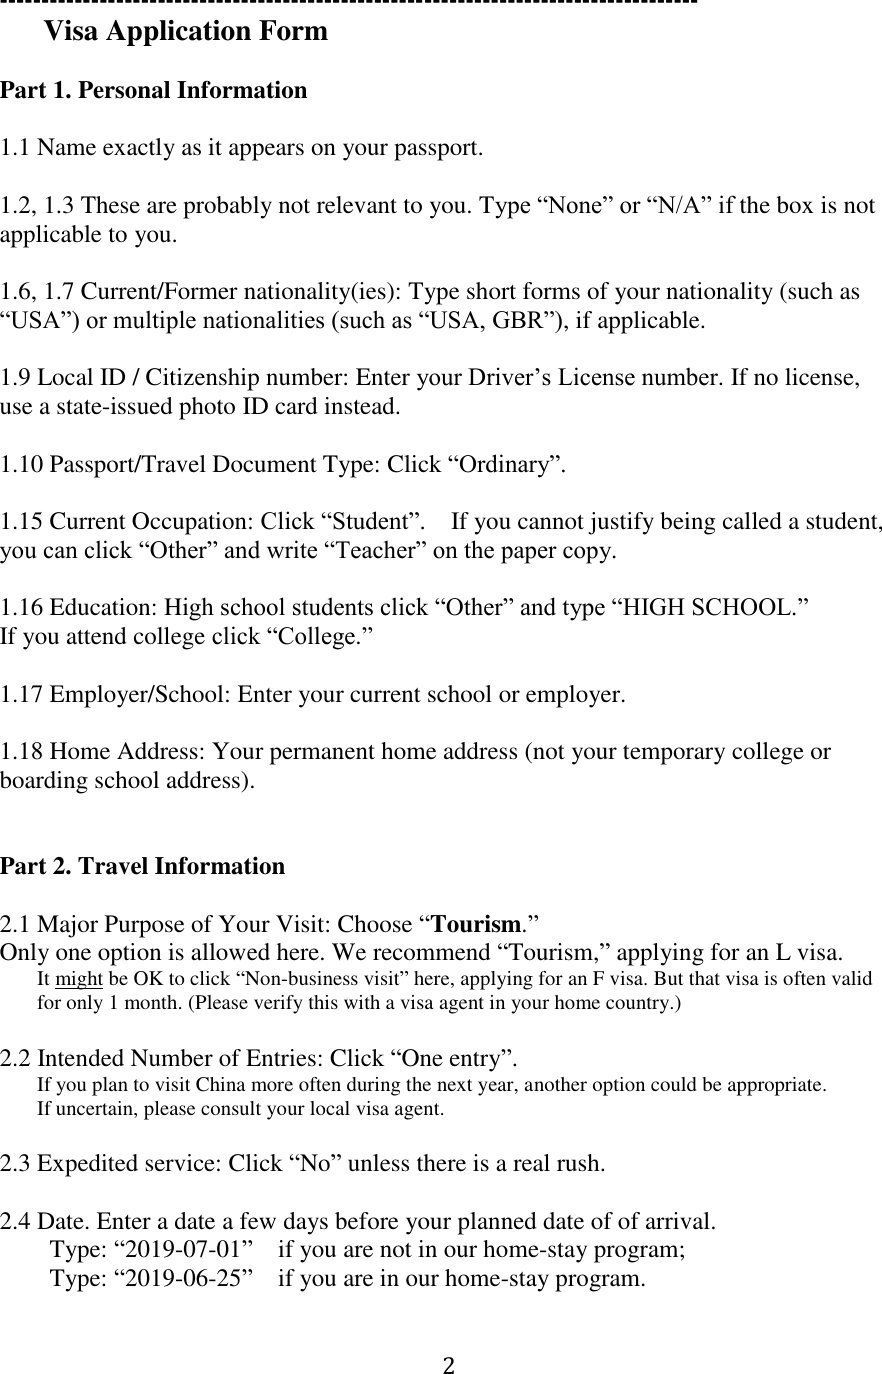 Page 2 of 3 - Instructions-for-visa-application-form